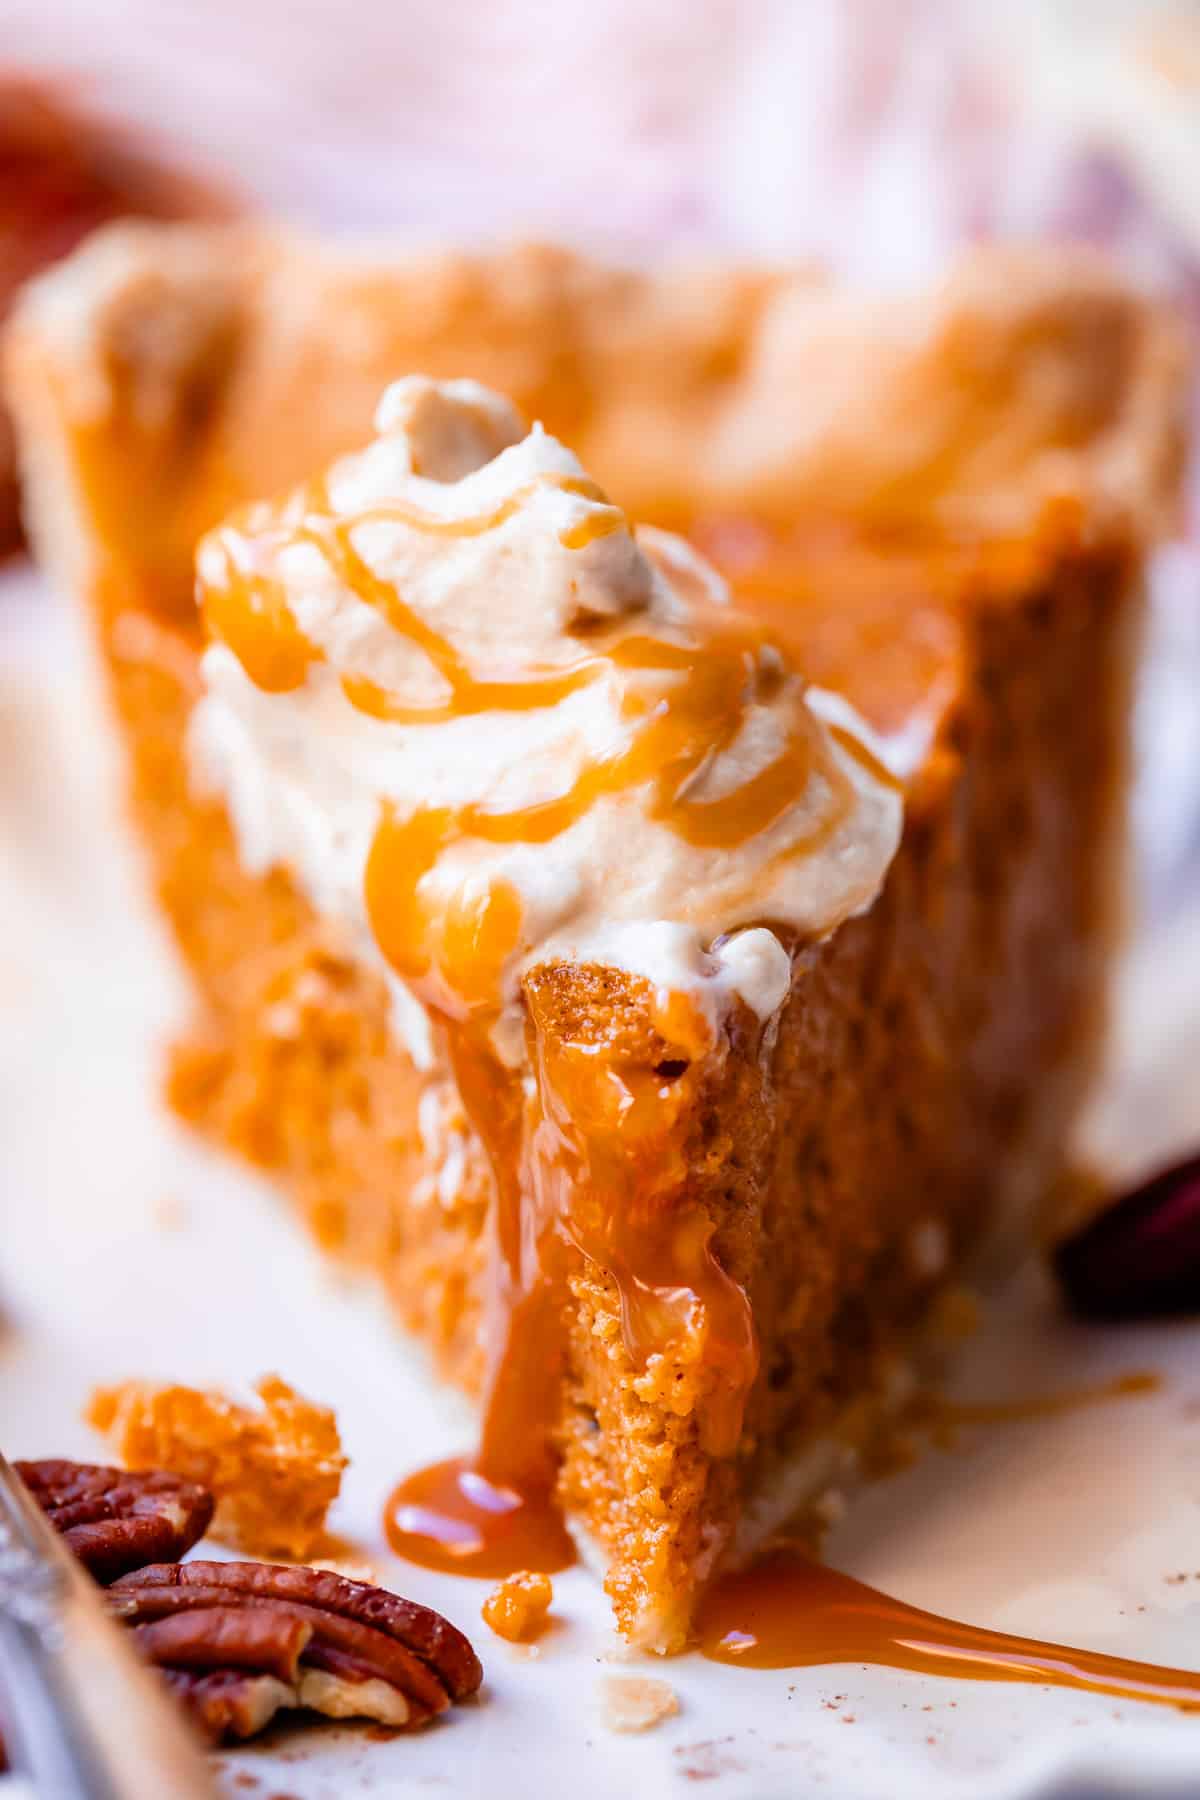 slice of pie with a dollop of whipped cream and extra caramel drizzled over the top.